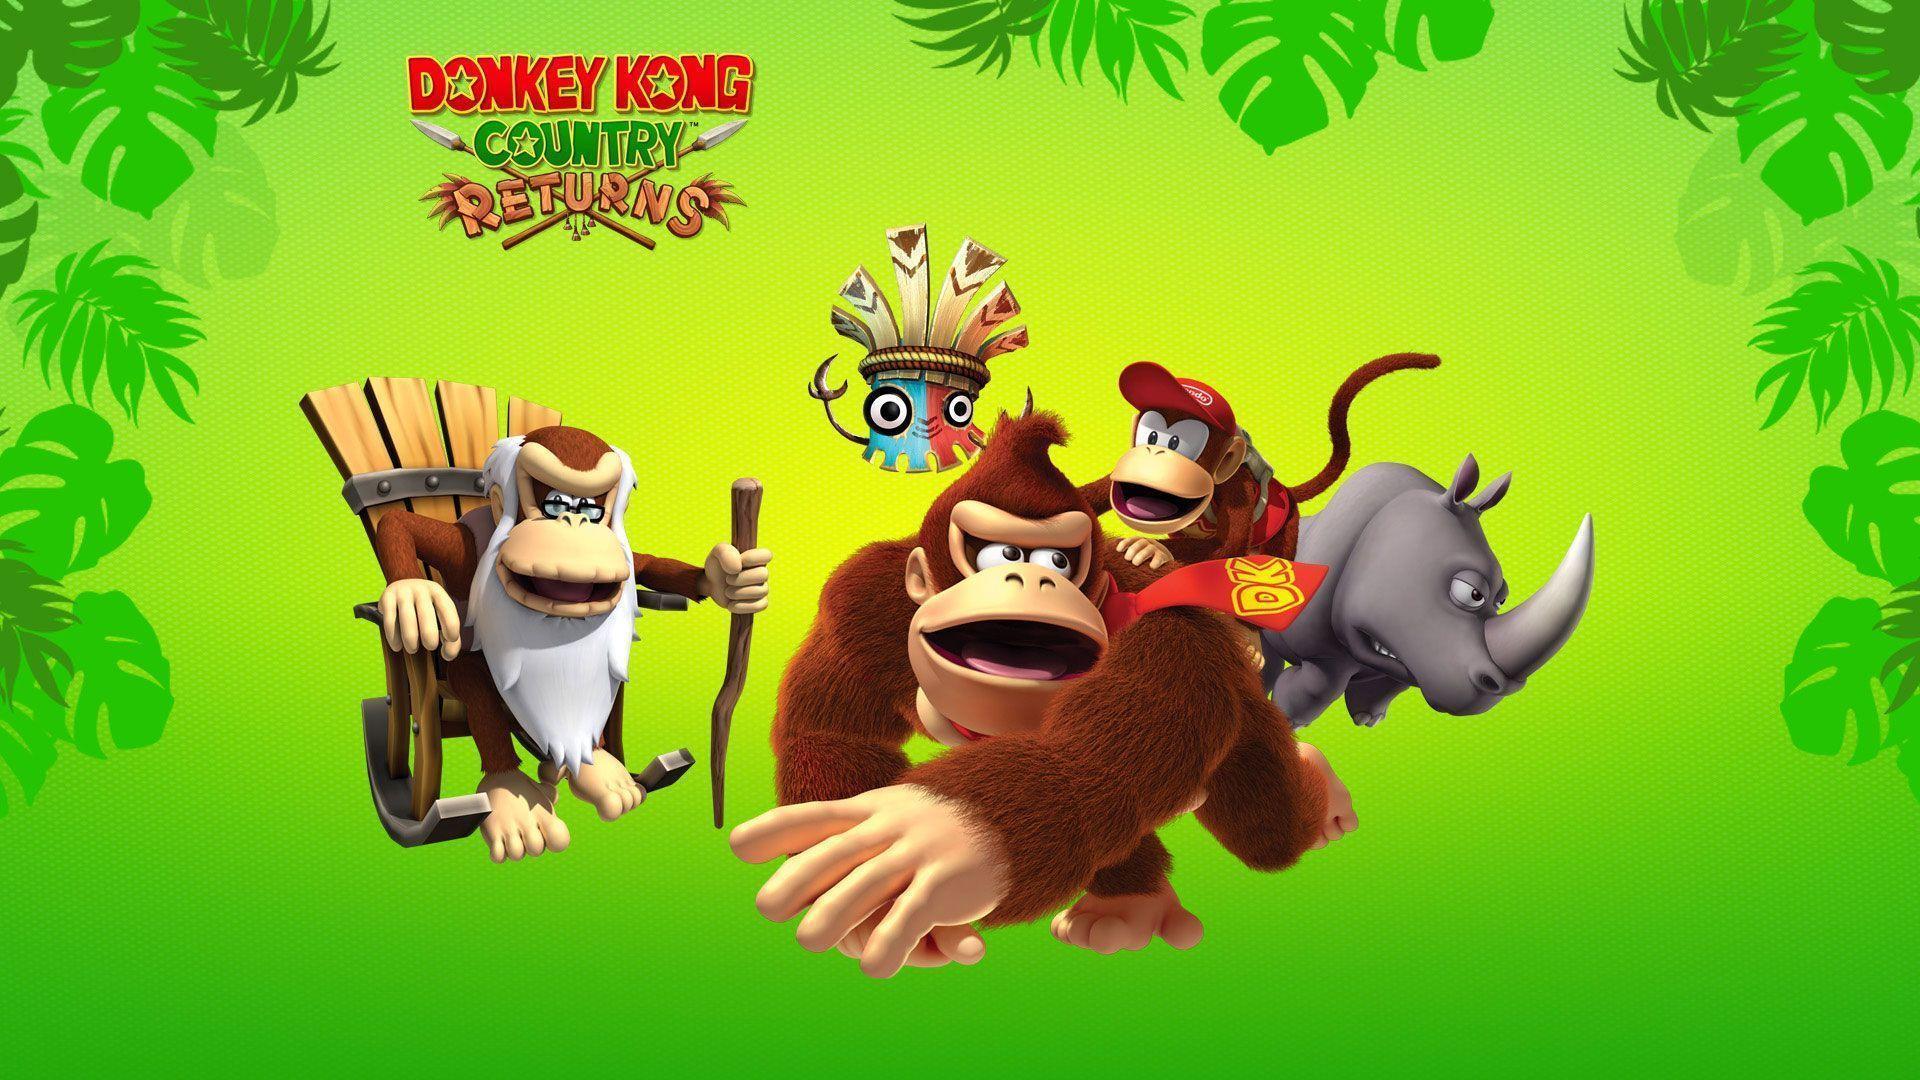 Donkey Kong Country Wallpapers - Wallpaper Cave